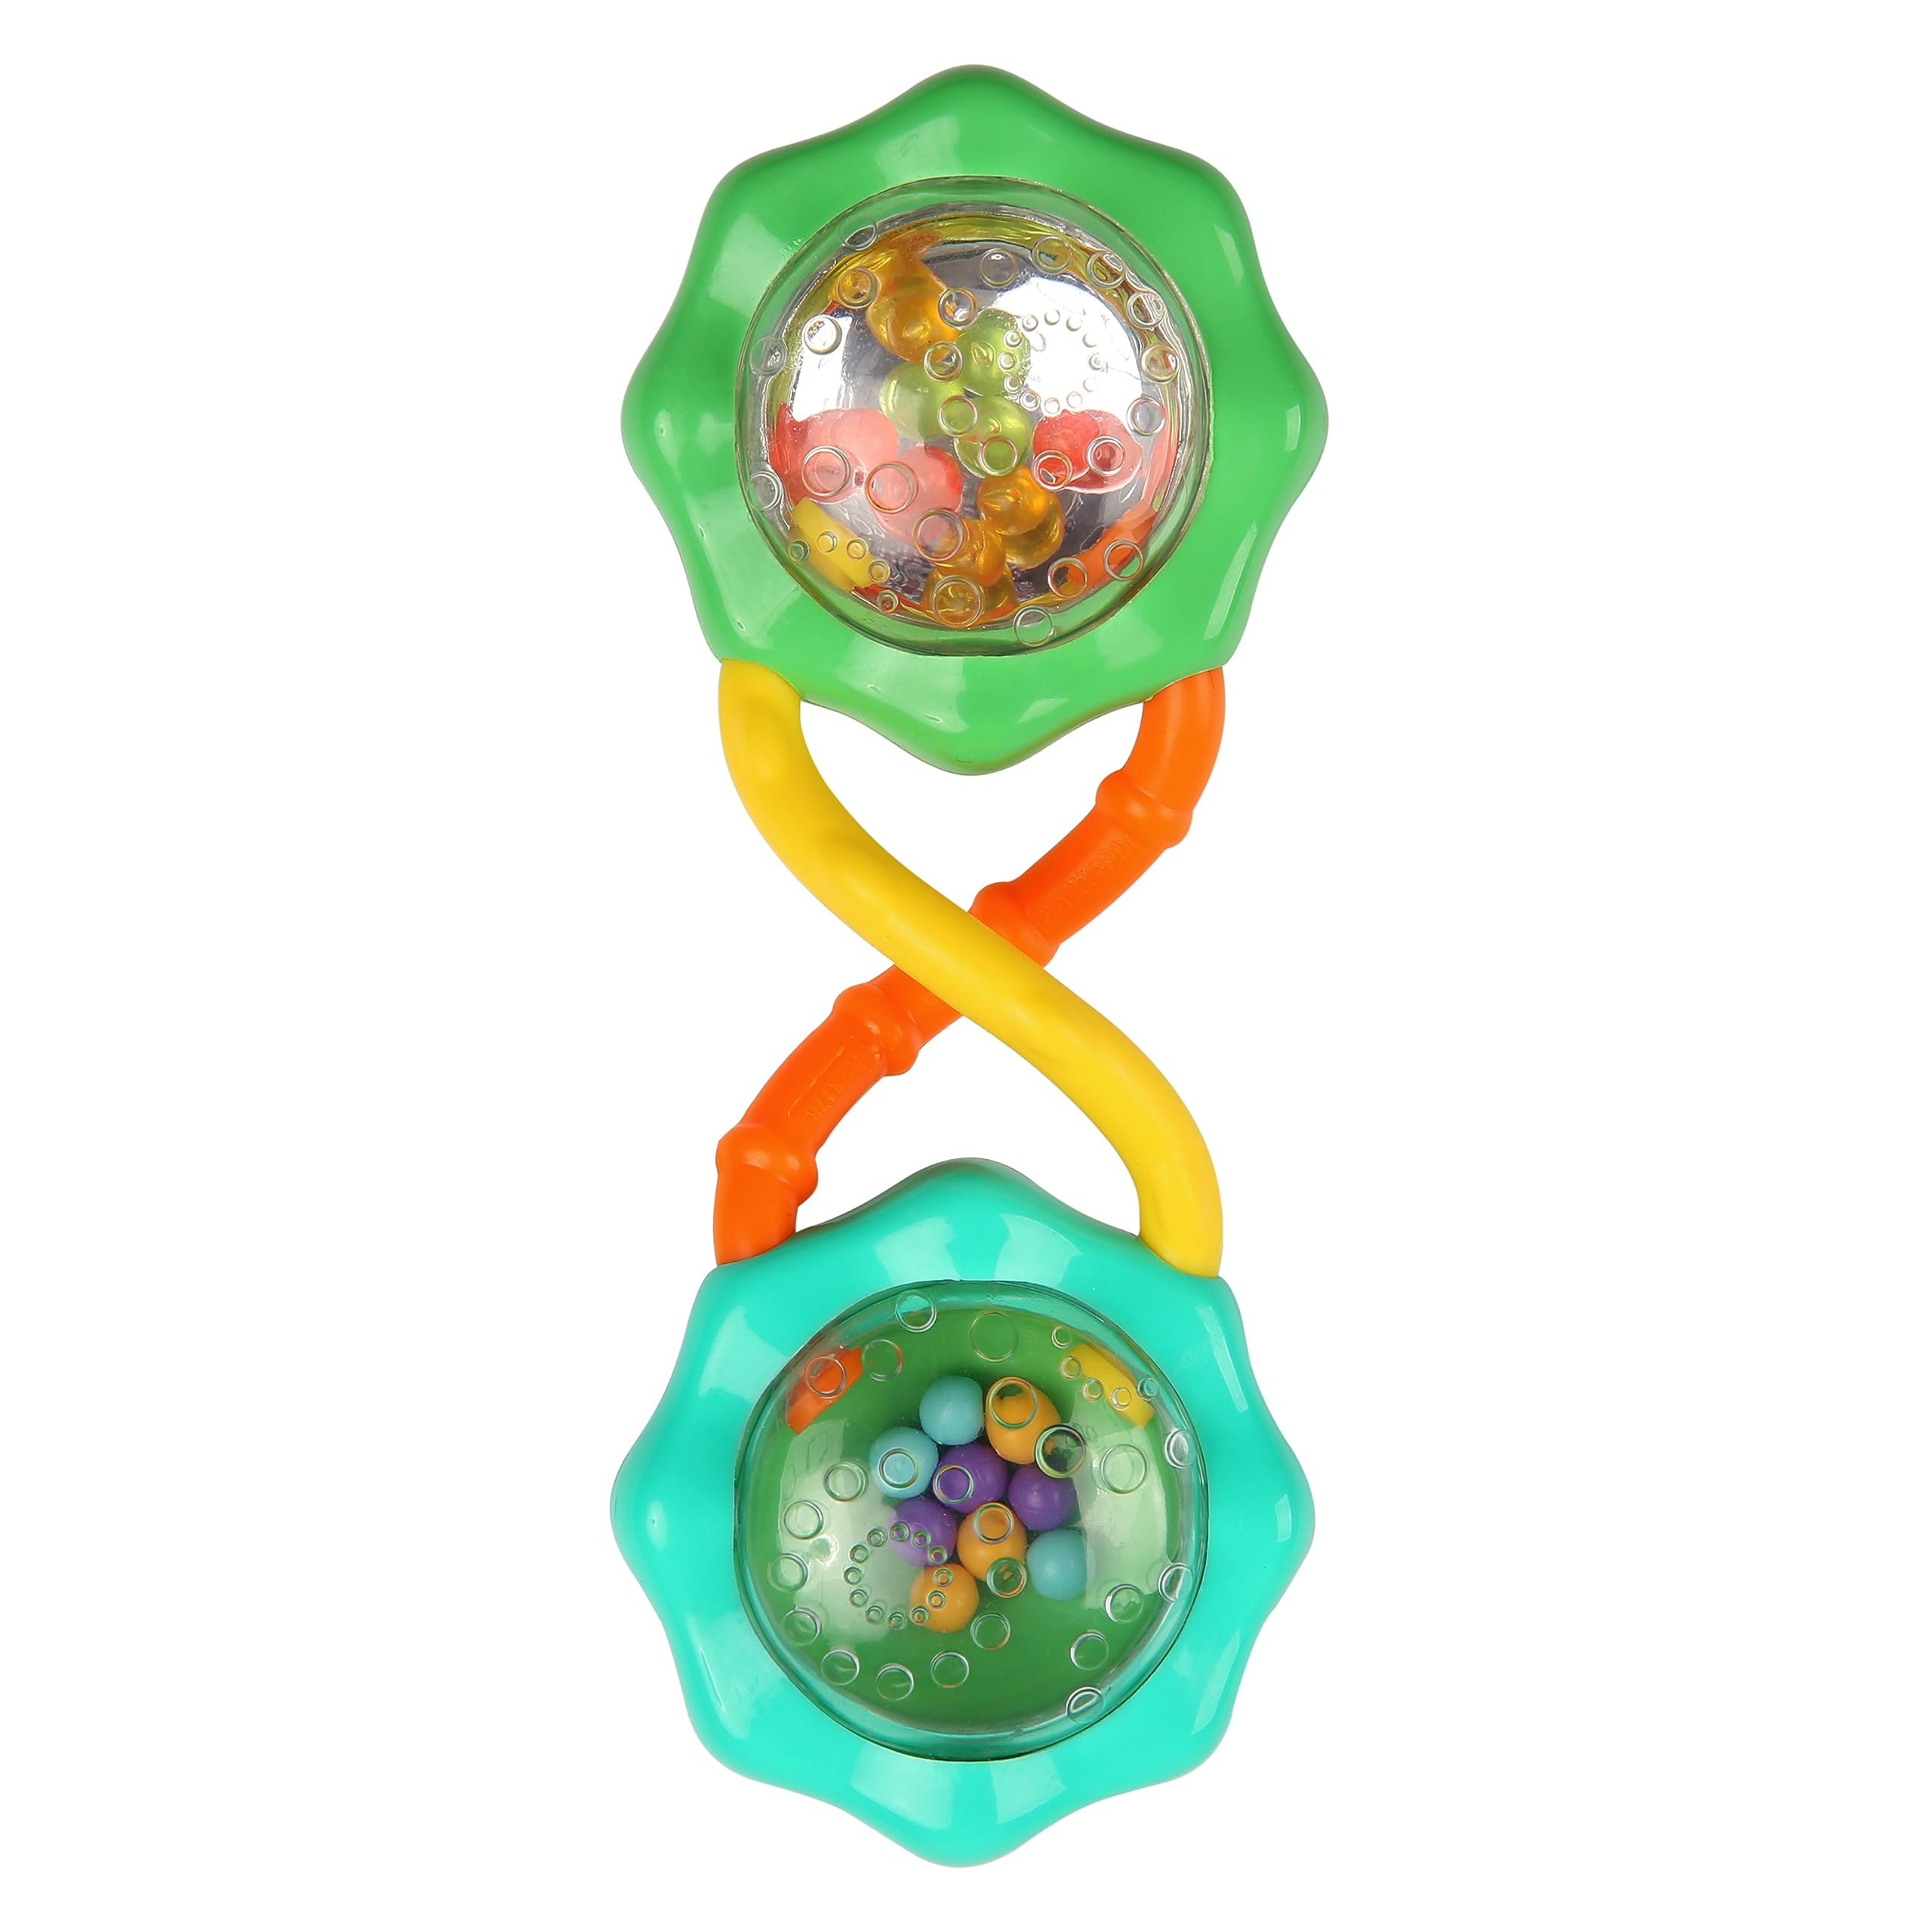 Bright Starts Rattle & Shake BPA-free Baby Barbell Toy, Green, Ages 3 Months+